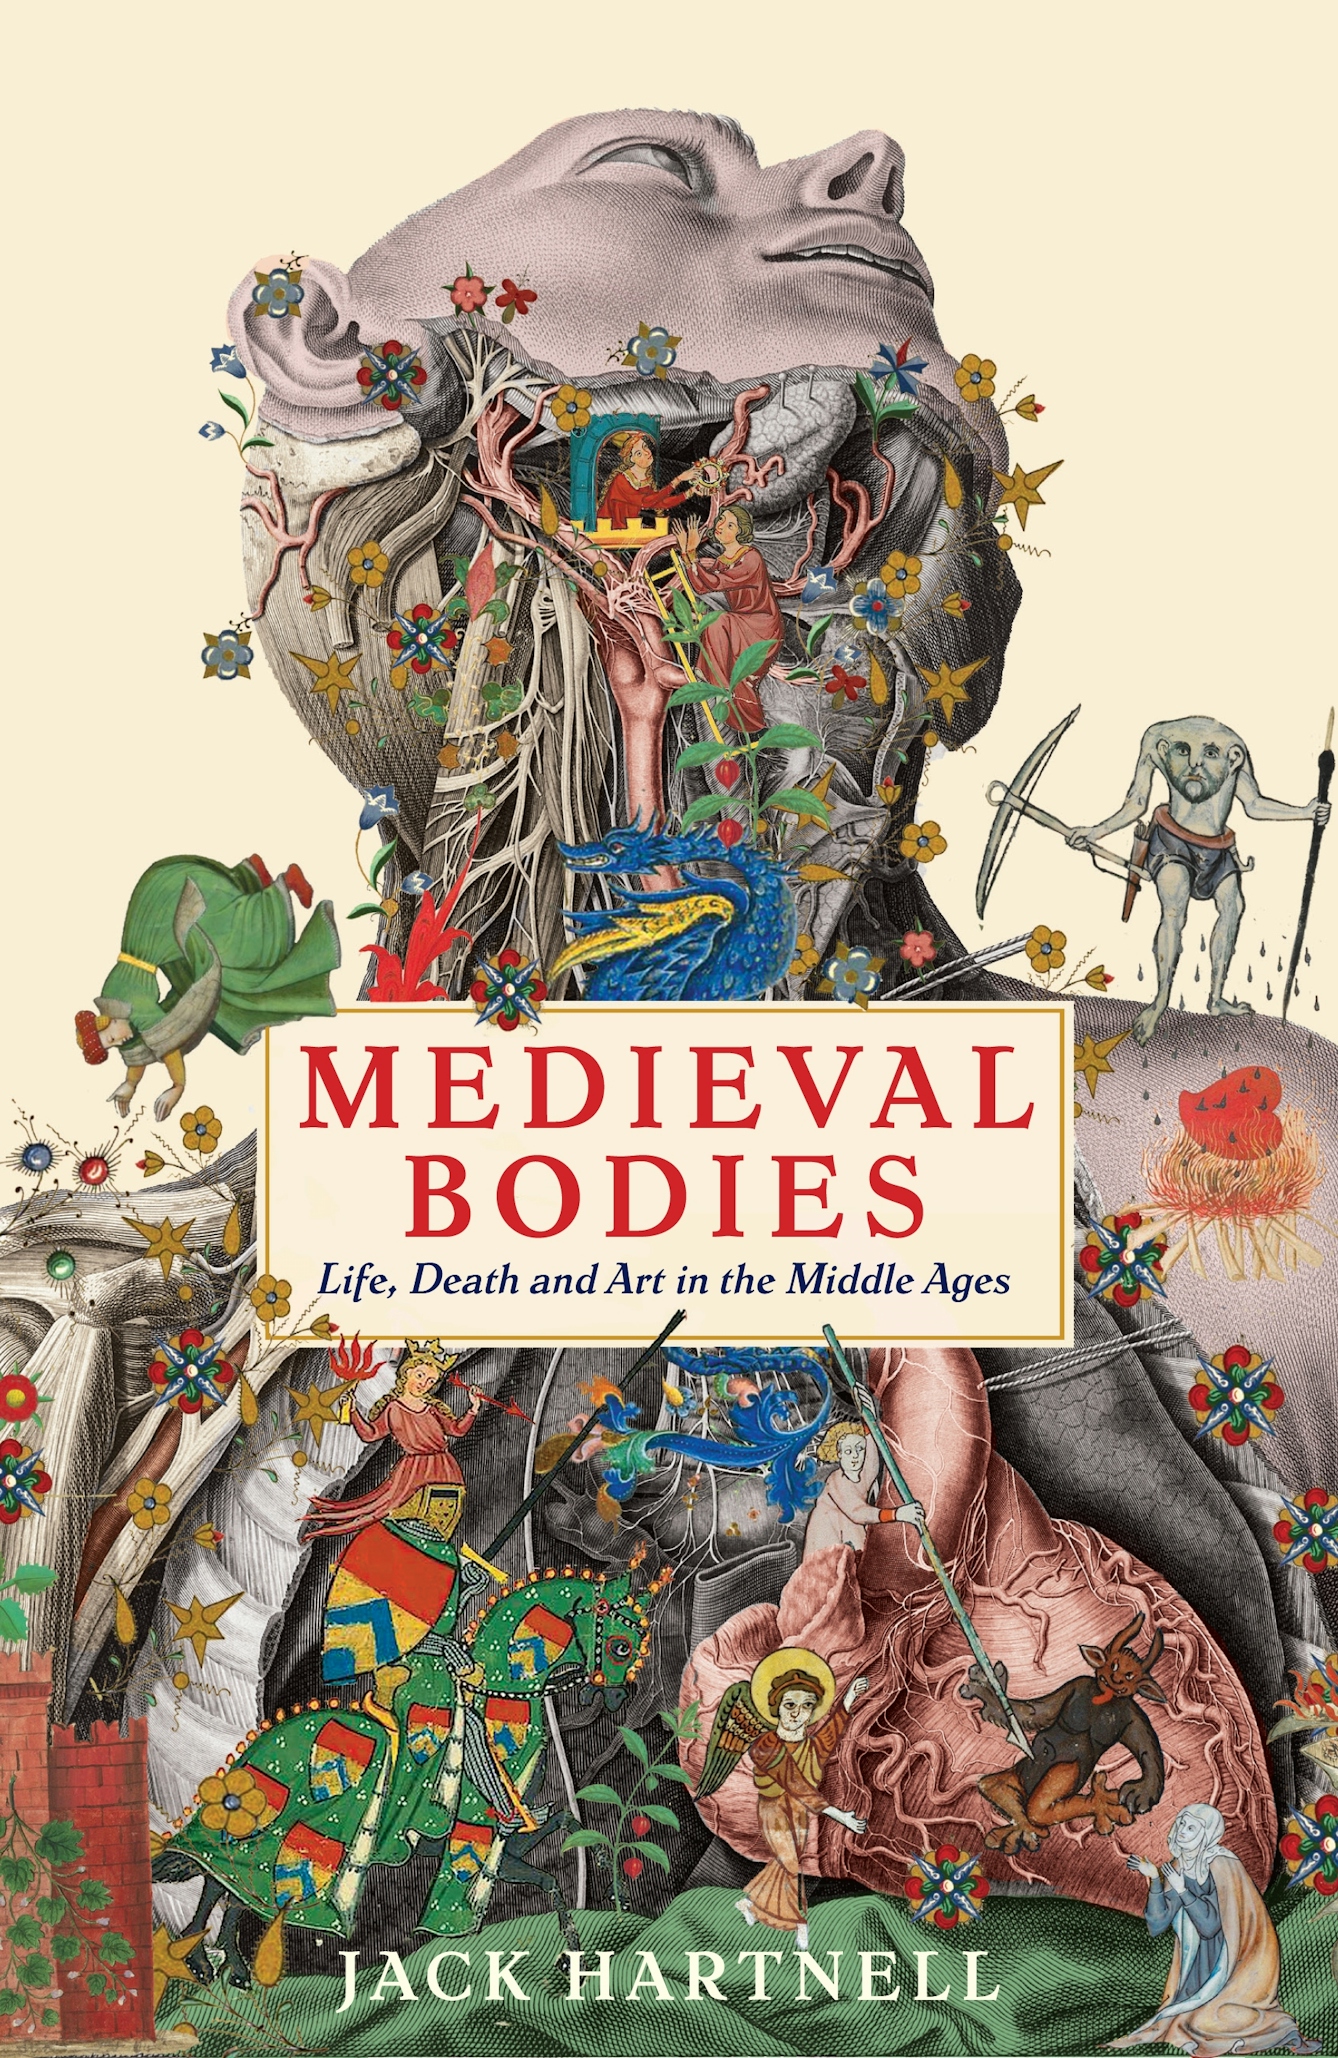 The cover of Medieval Bodies as published